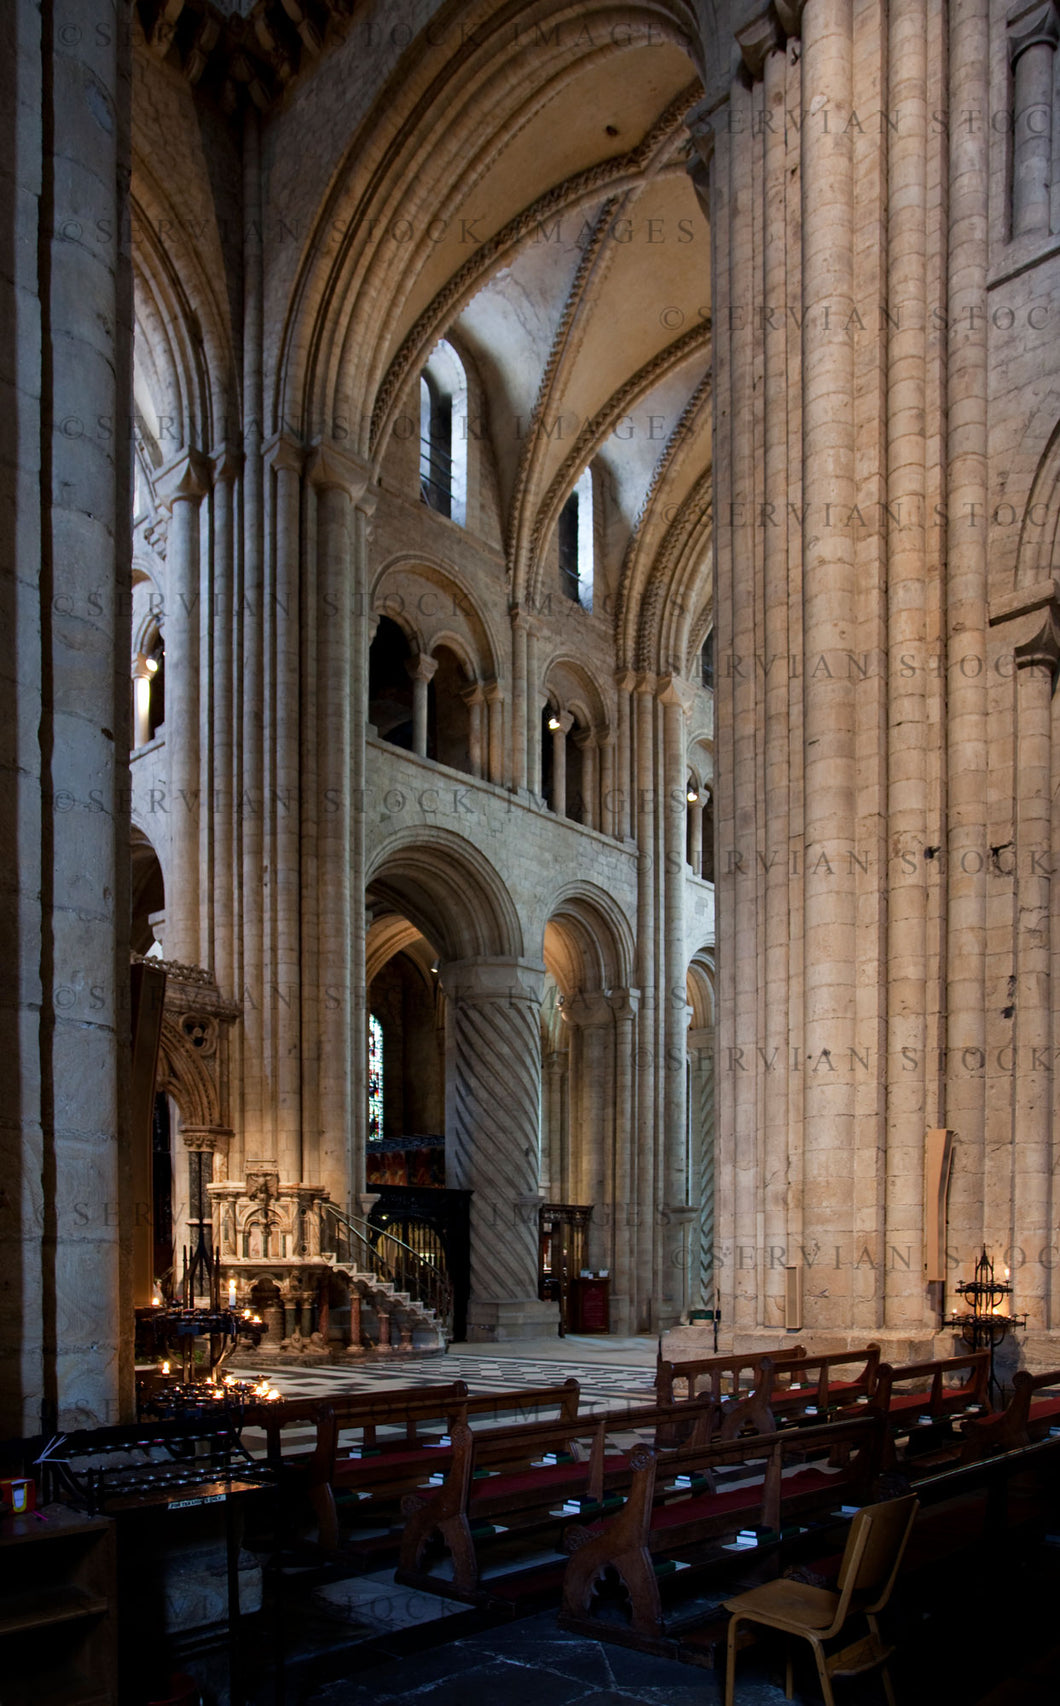 Historical building - Cathedral interior, UK (Nick 0527)